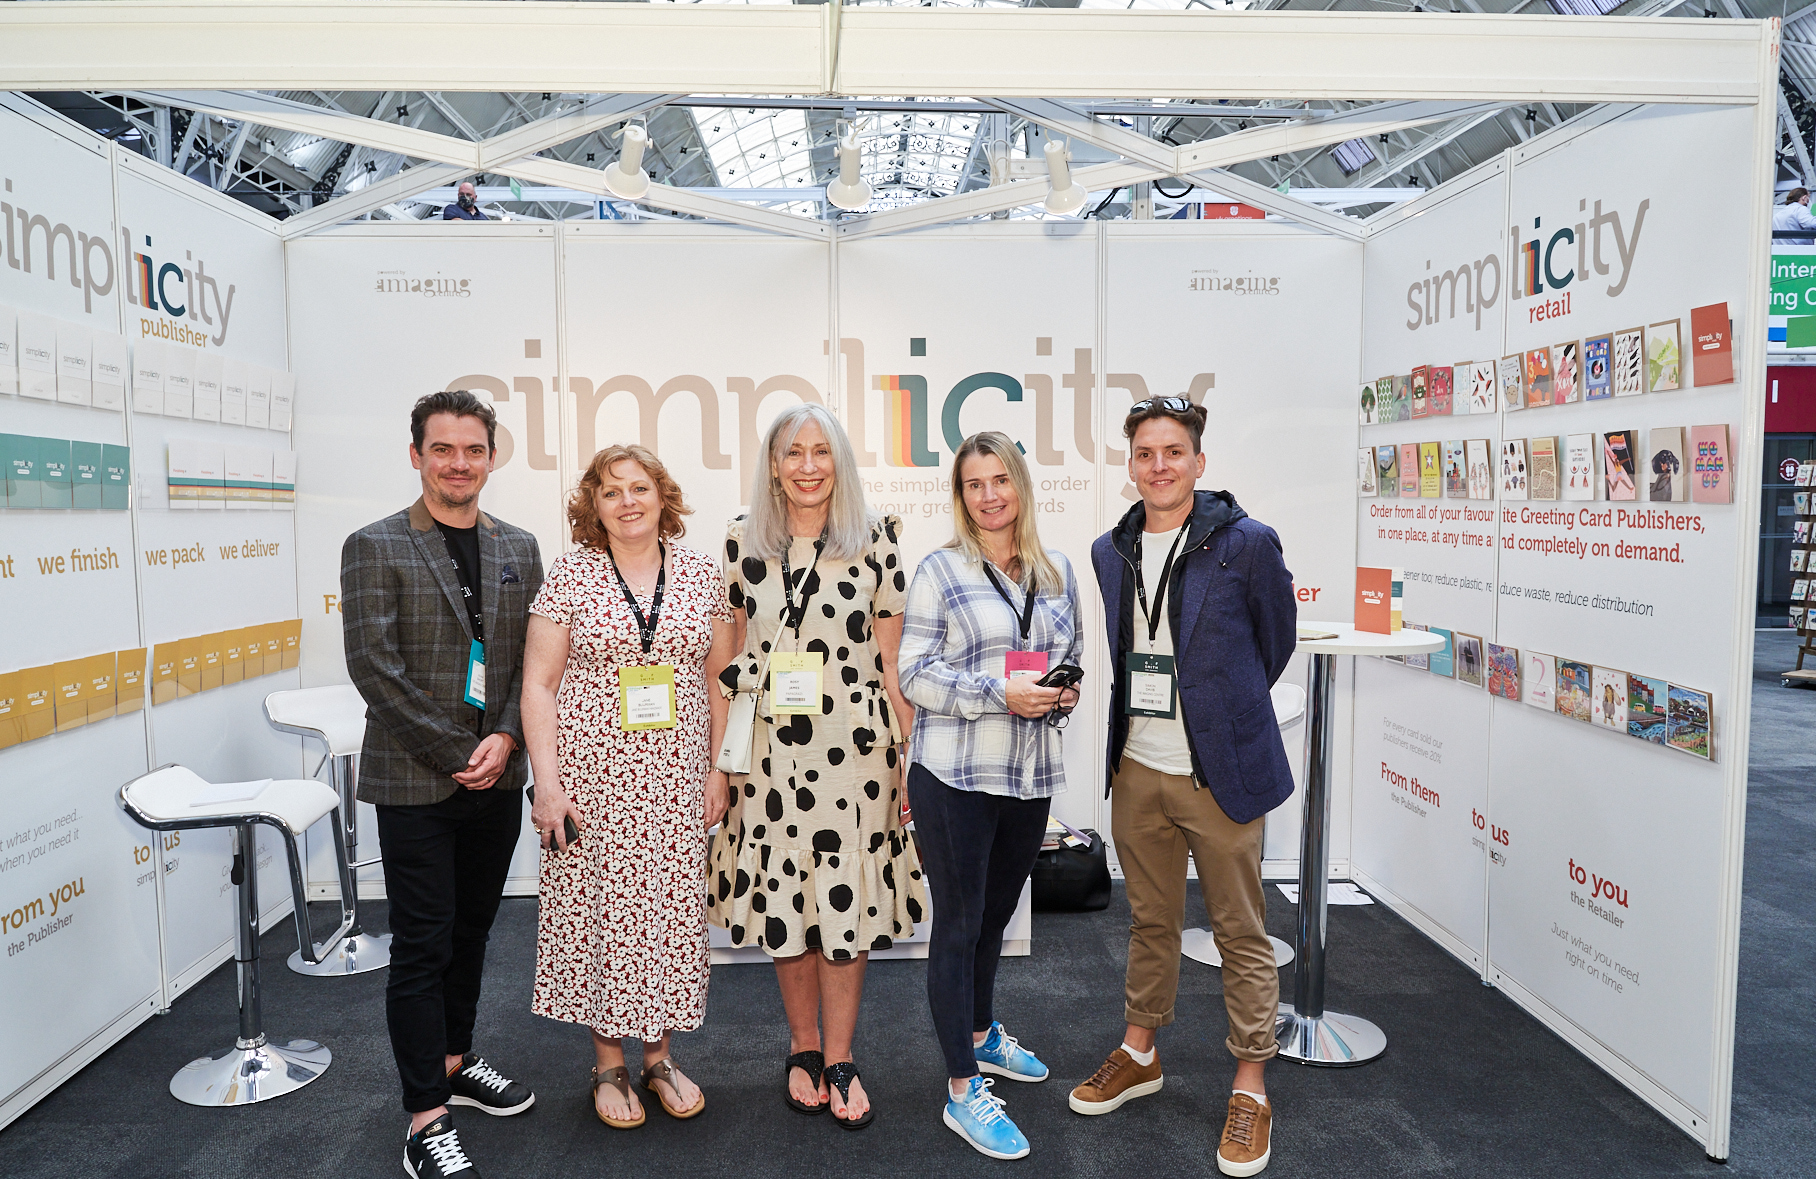 Above: On The Imaging Centre’s stand at PG Live. Adam Short (far left) and Simon Davis (far right) with publishers (second left-right) Jane Buurman of Jane Buurman Handmade, Papagrazi’s Rosy James and Shmuncki’s Helen Walters, who are all on board with Simplicity Retail.